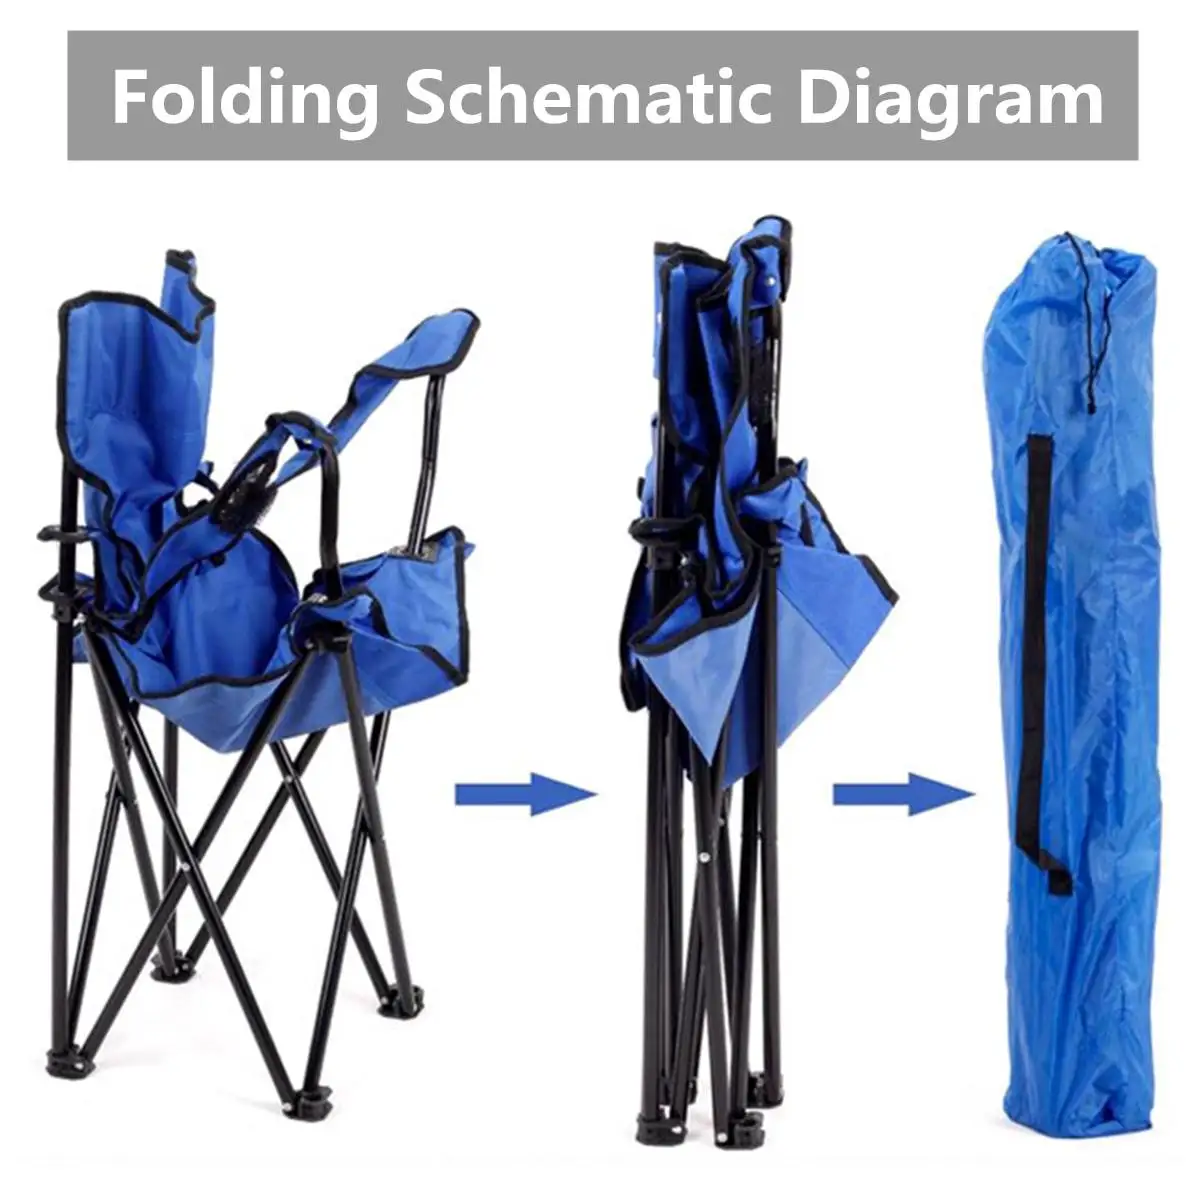 Light Folding Chair Camping Fishing Seat Portable Beach Garden Outdoor Camping Leisure Picnic Beach Chair Tool Foldable Chair